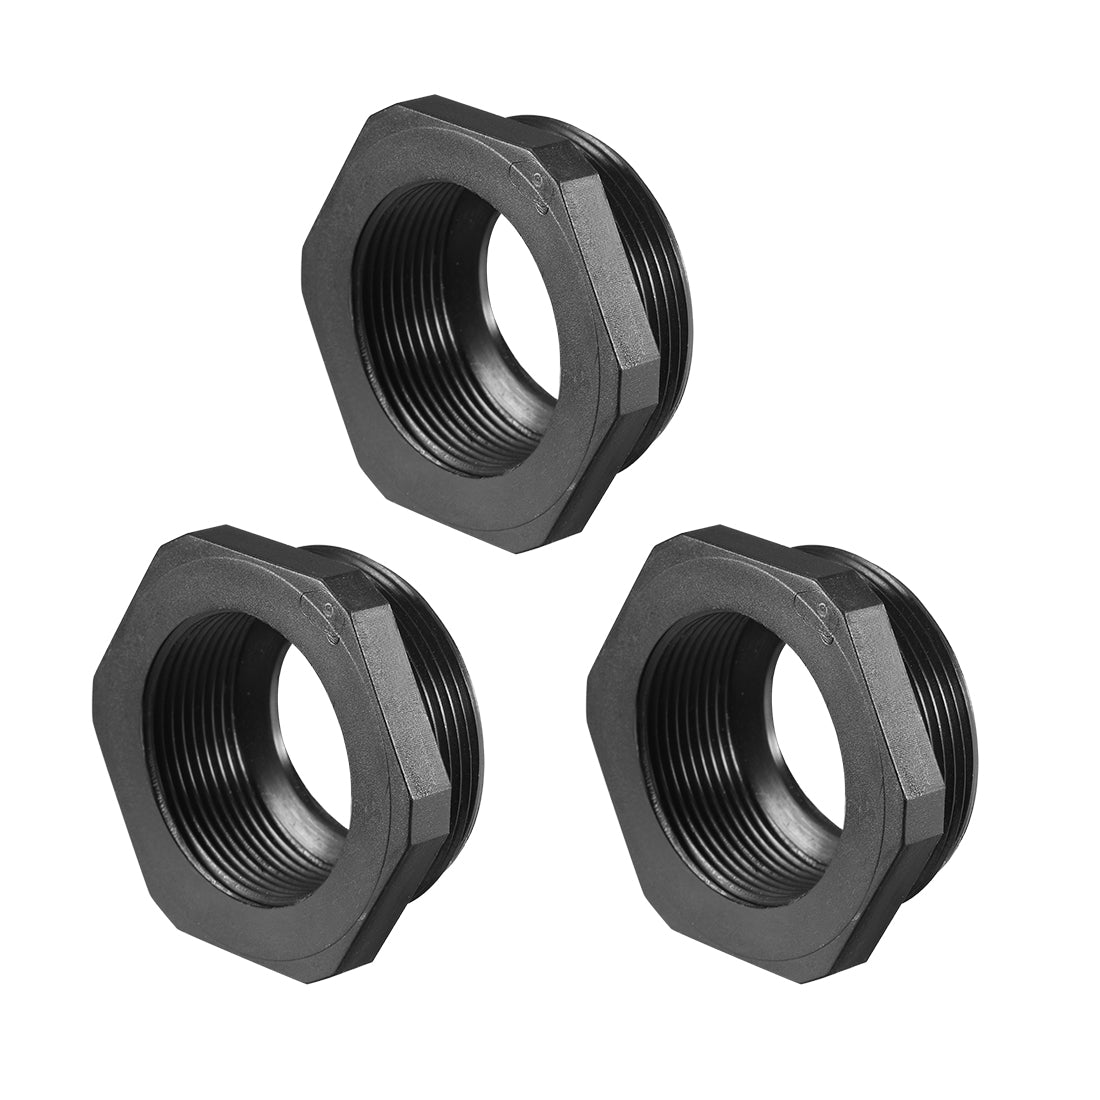 Uxcell Uxcell Threaded Reducing Bushings Nylon Connector Adaptor M40 Male Thread to M32 Female Thread Black , 3 Pcs